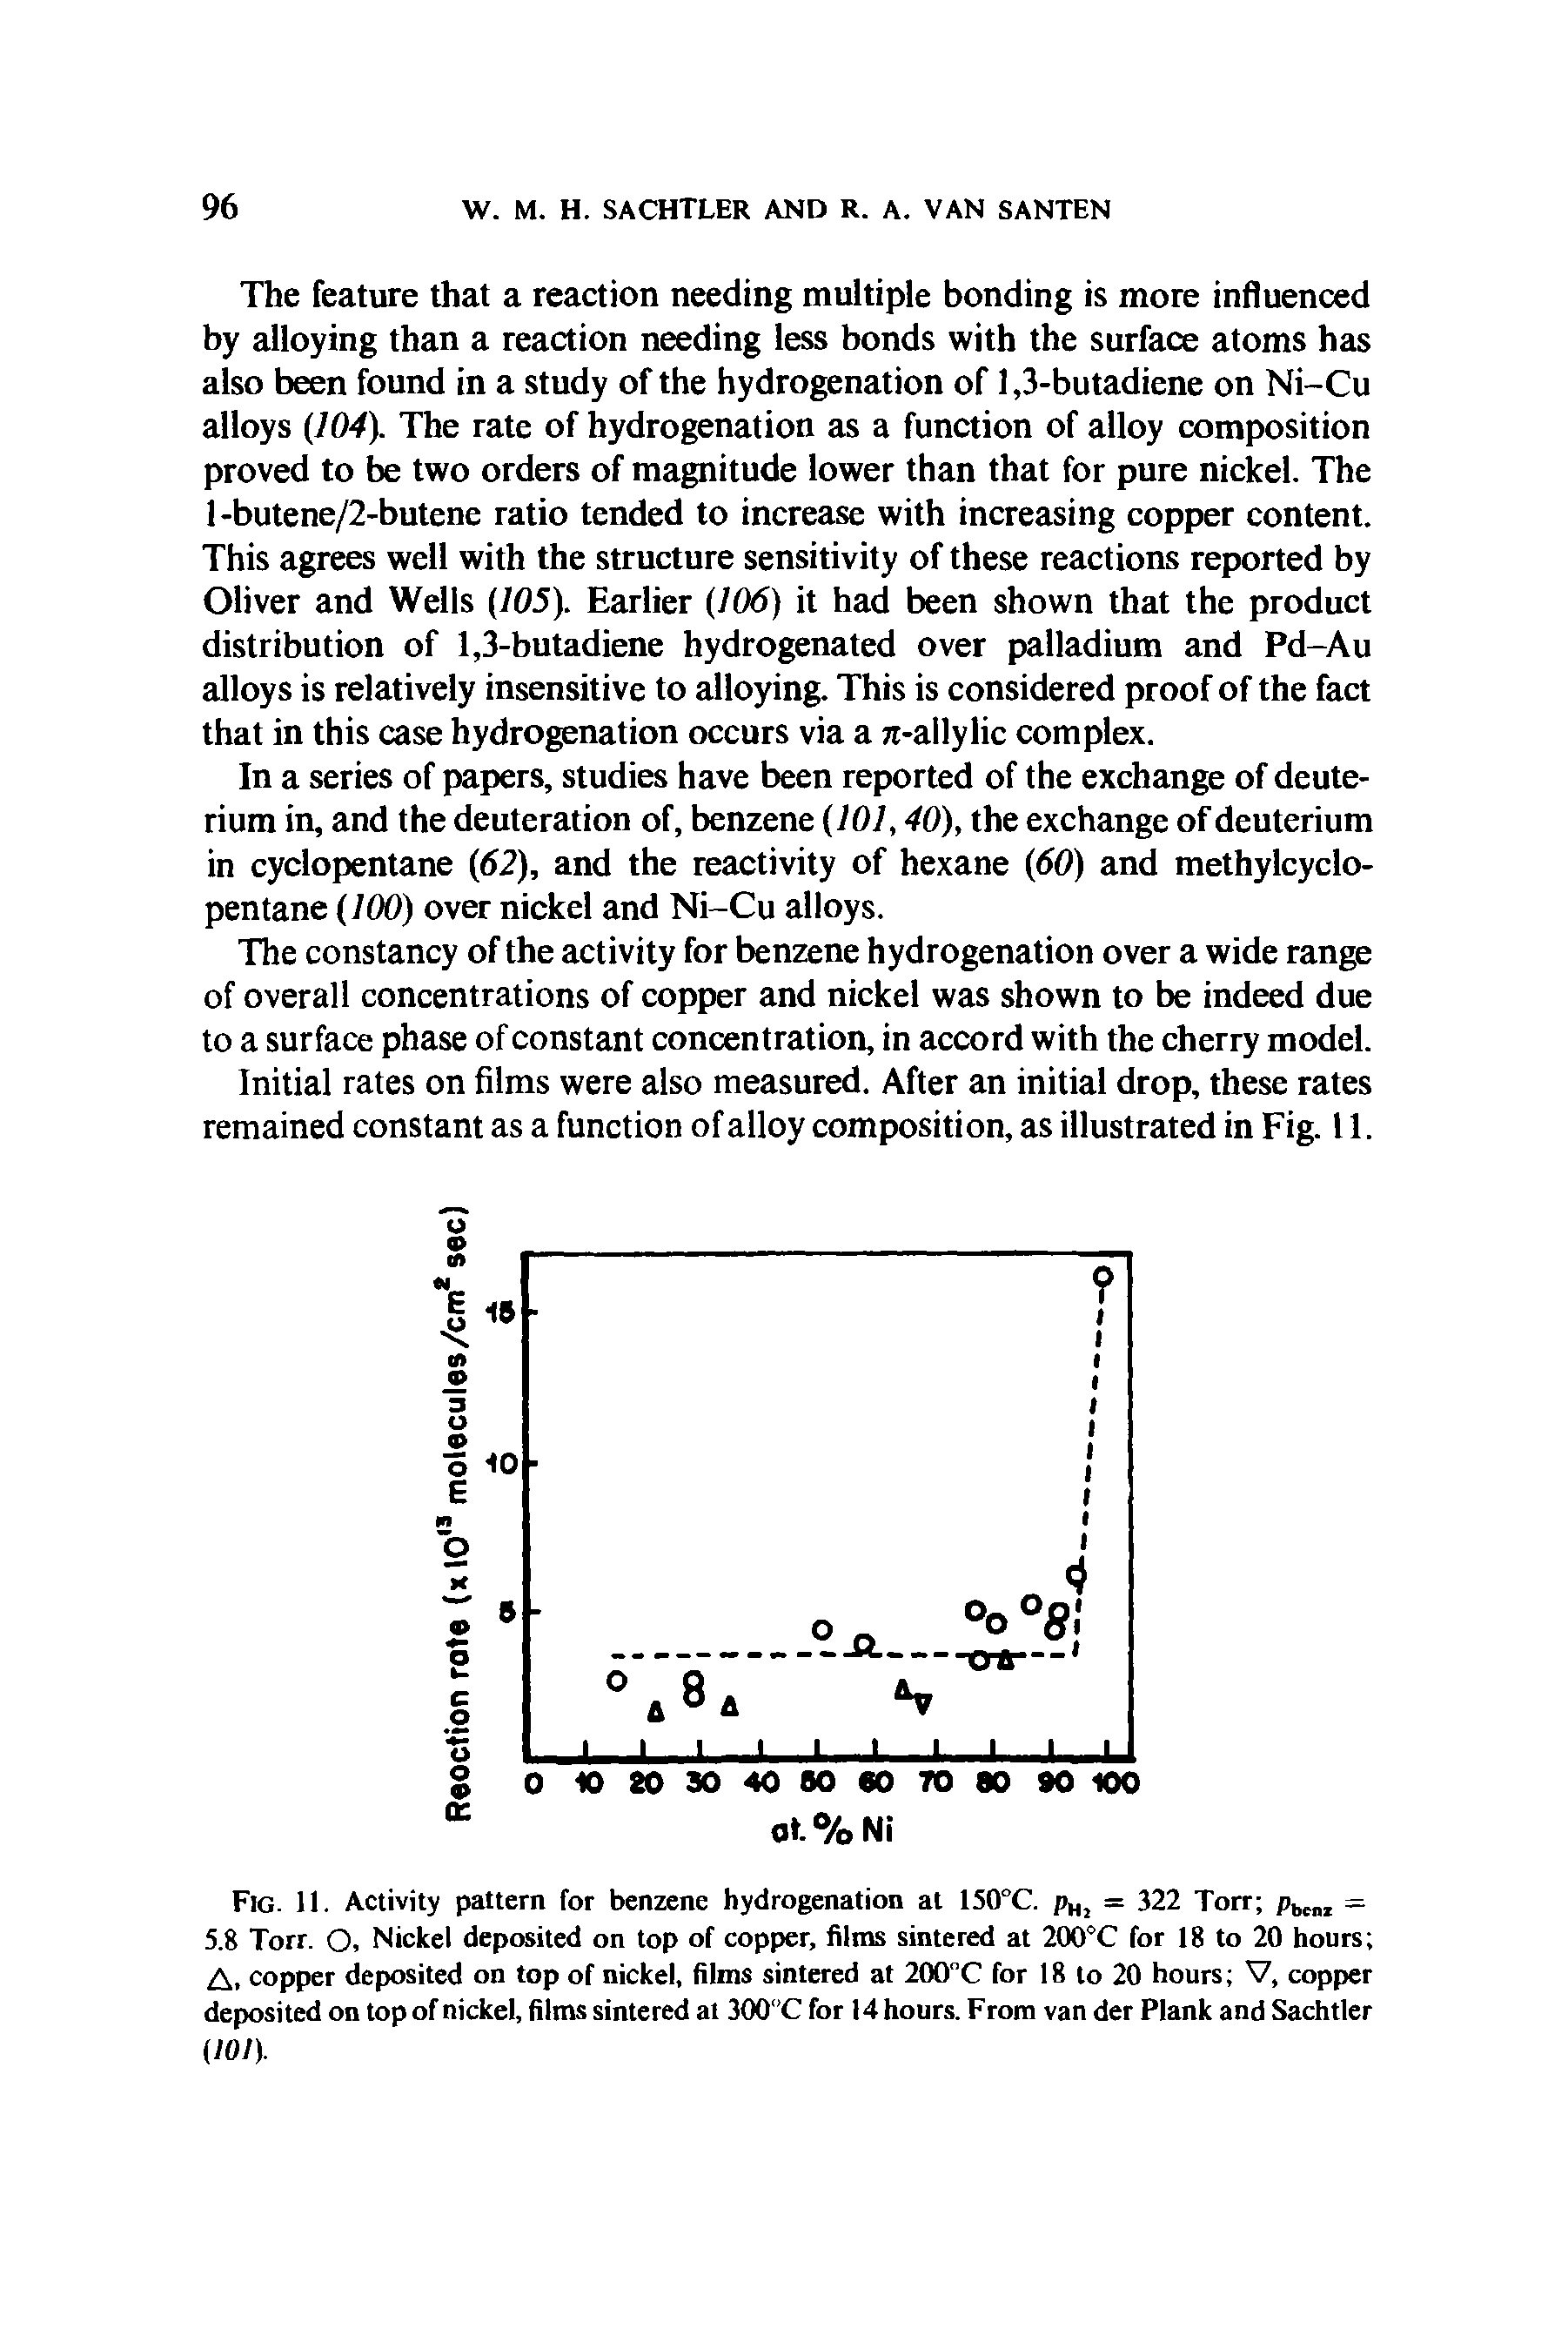 Fig. 11. Activity pattern for benzene hydrogenation at 150°C. pHl = 322 Torr pbcnl = 5.8 Torr. O, Nickel deposited on top of copper, films sintered at 200°C for 18 to 20 hours A, copper deposited on top of nickel, films sintered at 200"C for 18 to 20 hours V, copper deposited on top of nickel, films sintered at 300°C for 14 hours. From van der Plank and Sachtler (101).